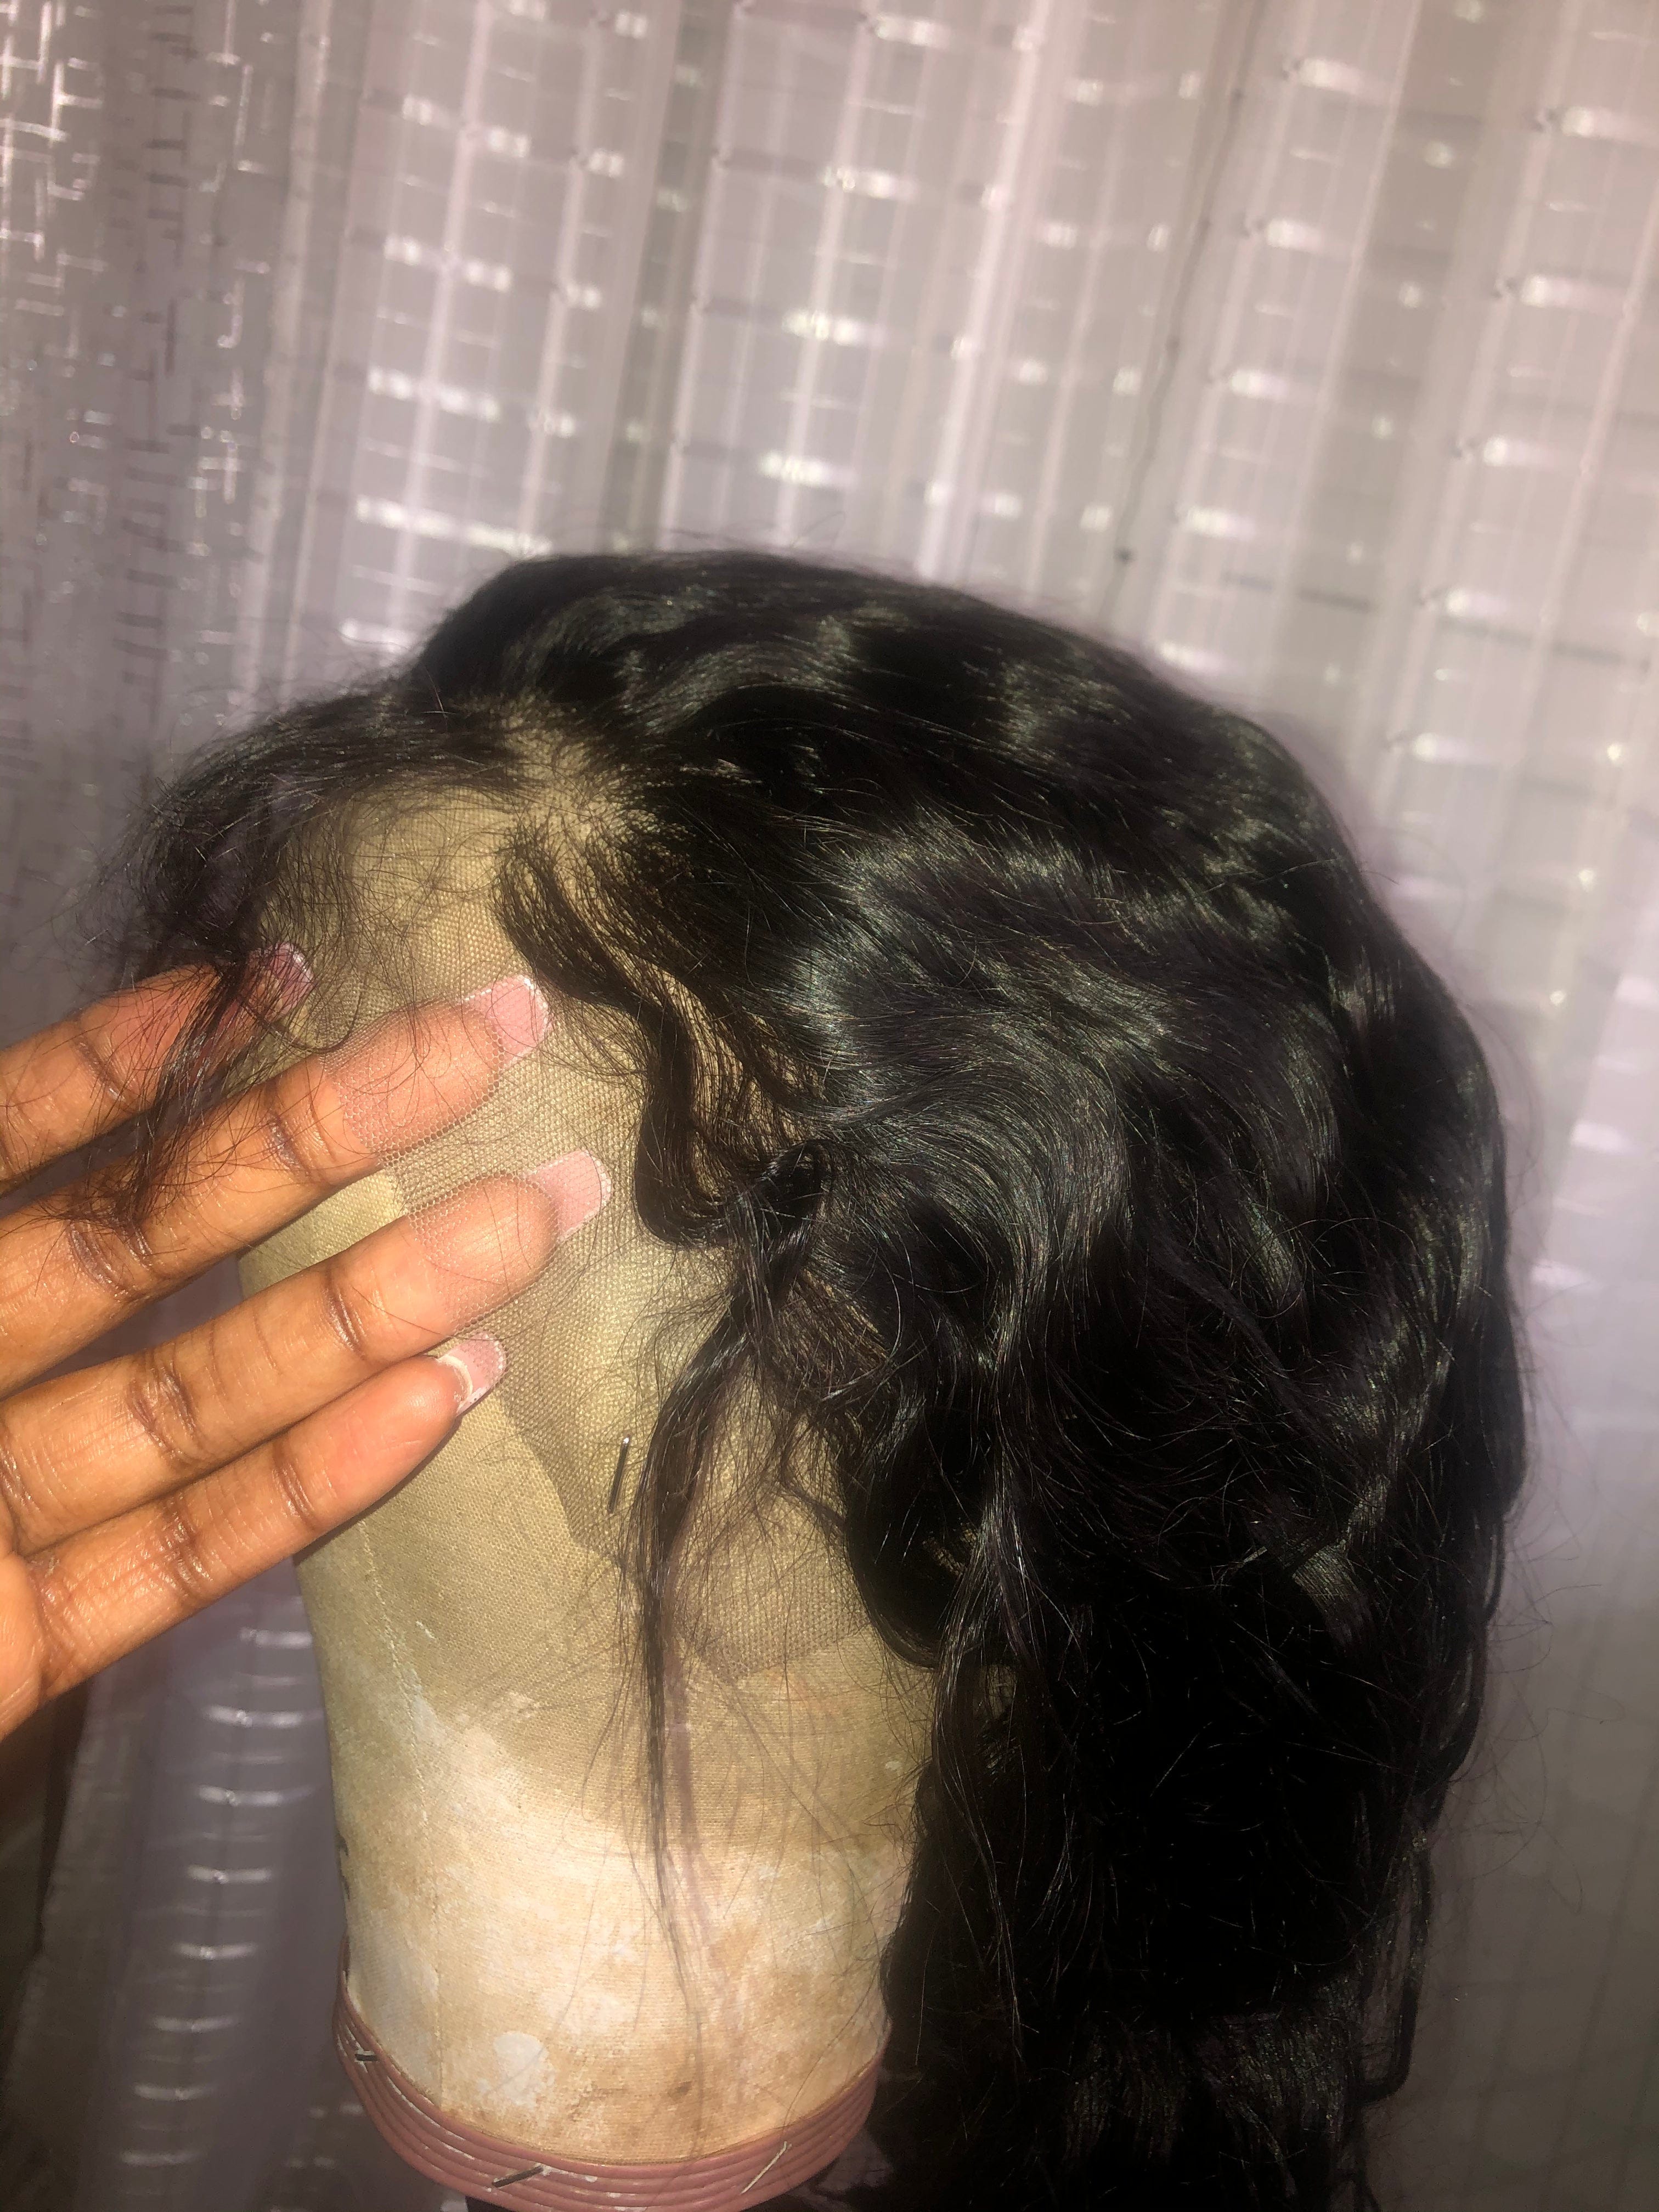 Loose Wave Full lace Wig